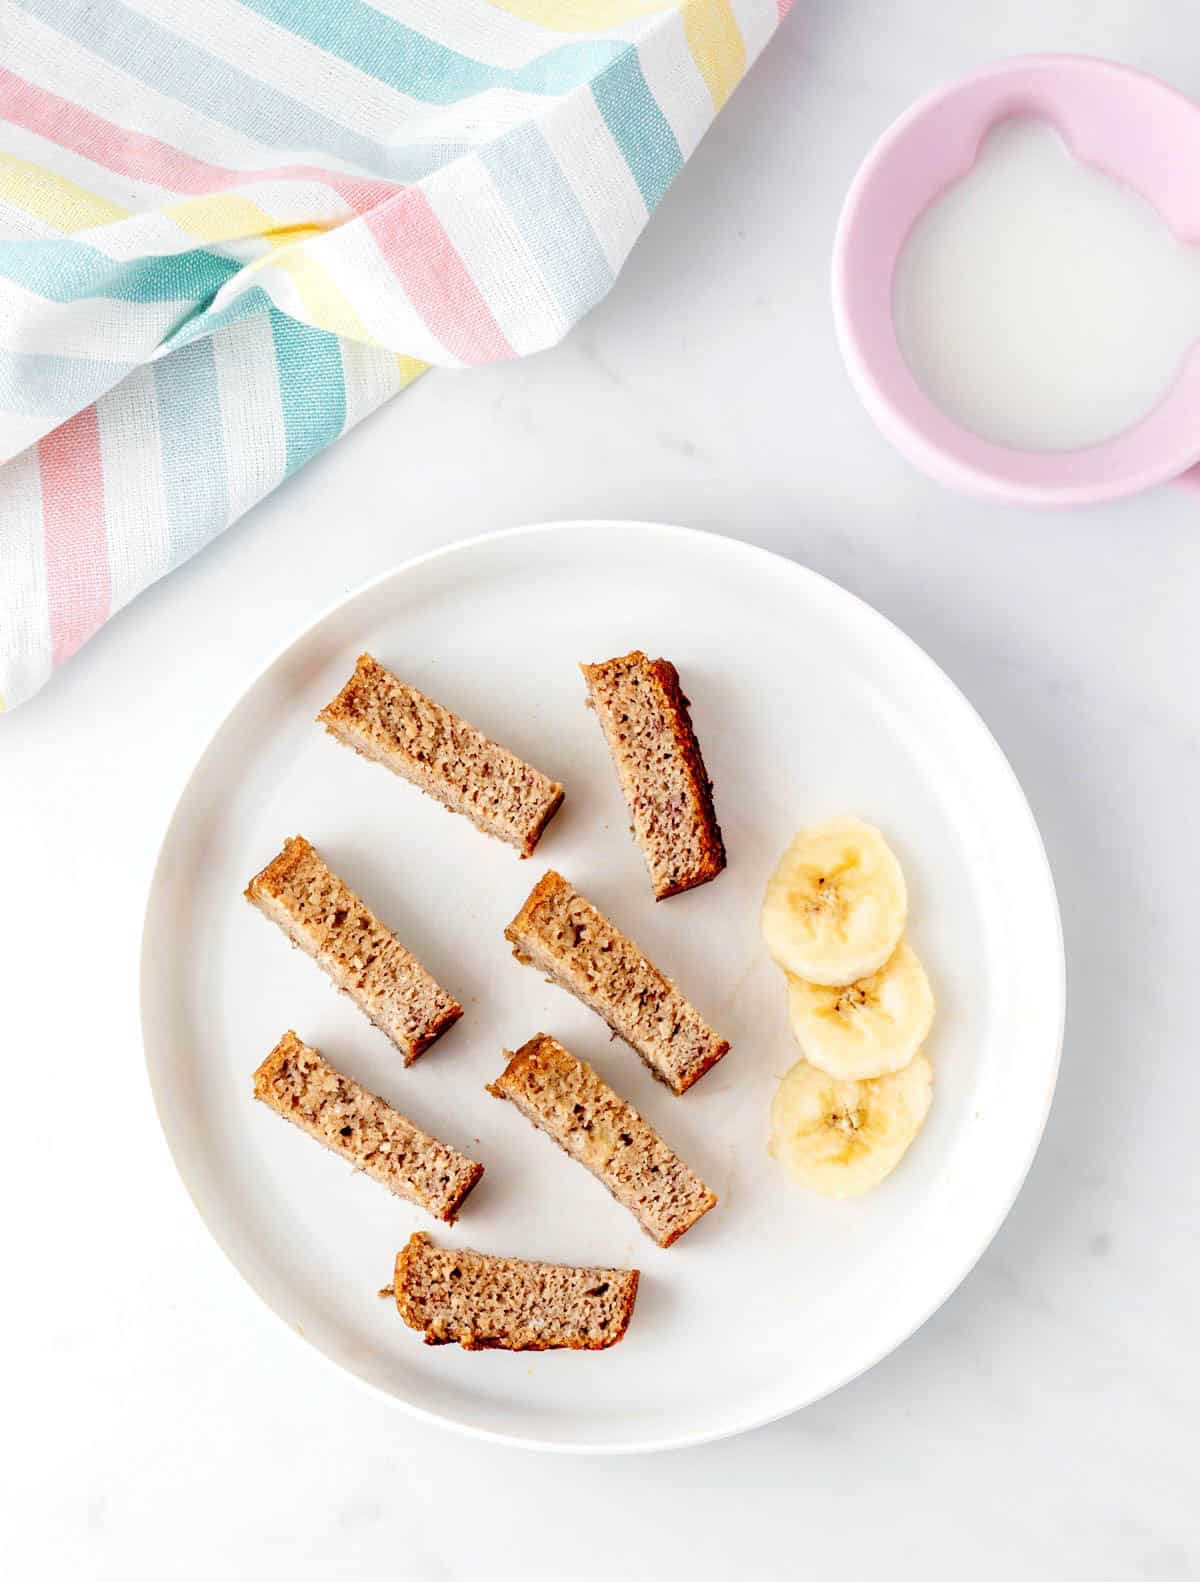 A plate with banana bread cut into thin slices for baby led weaning.